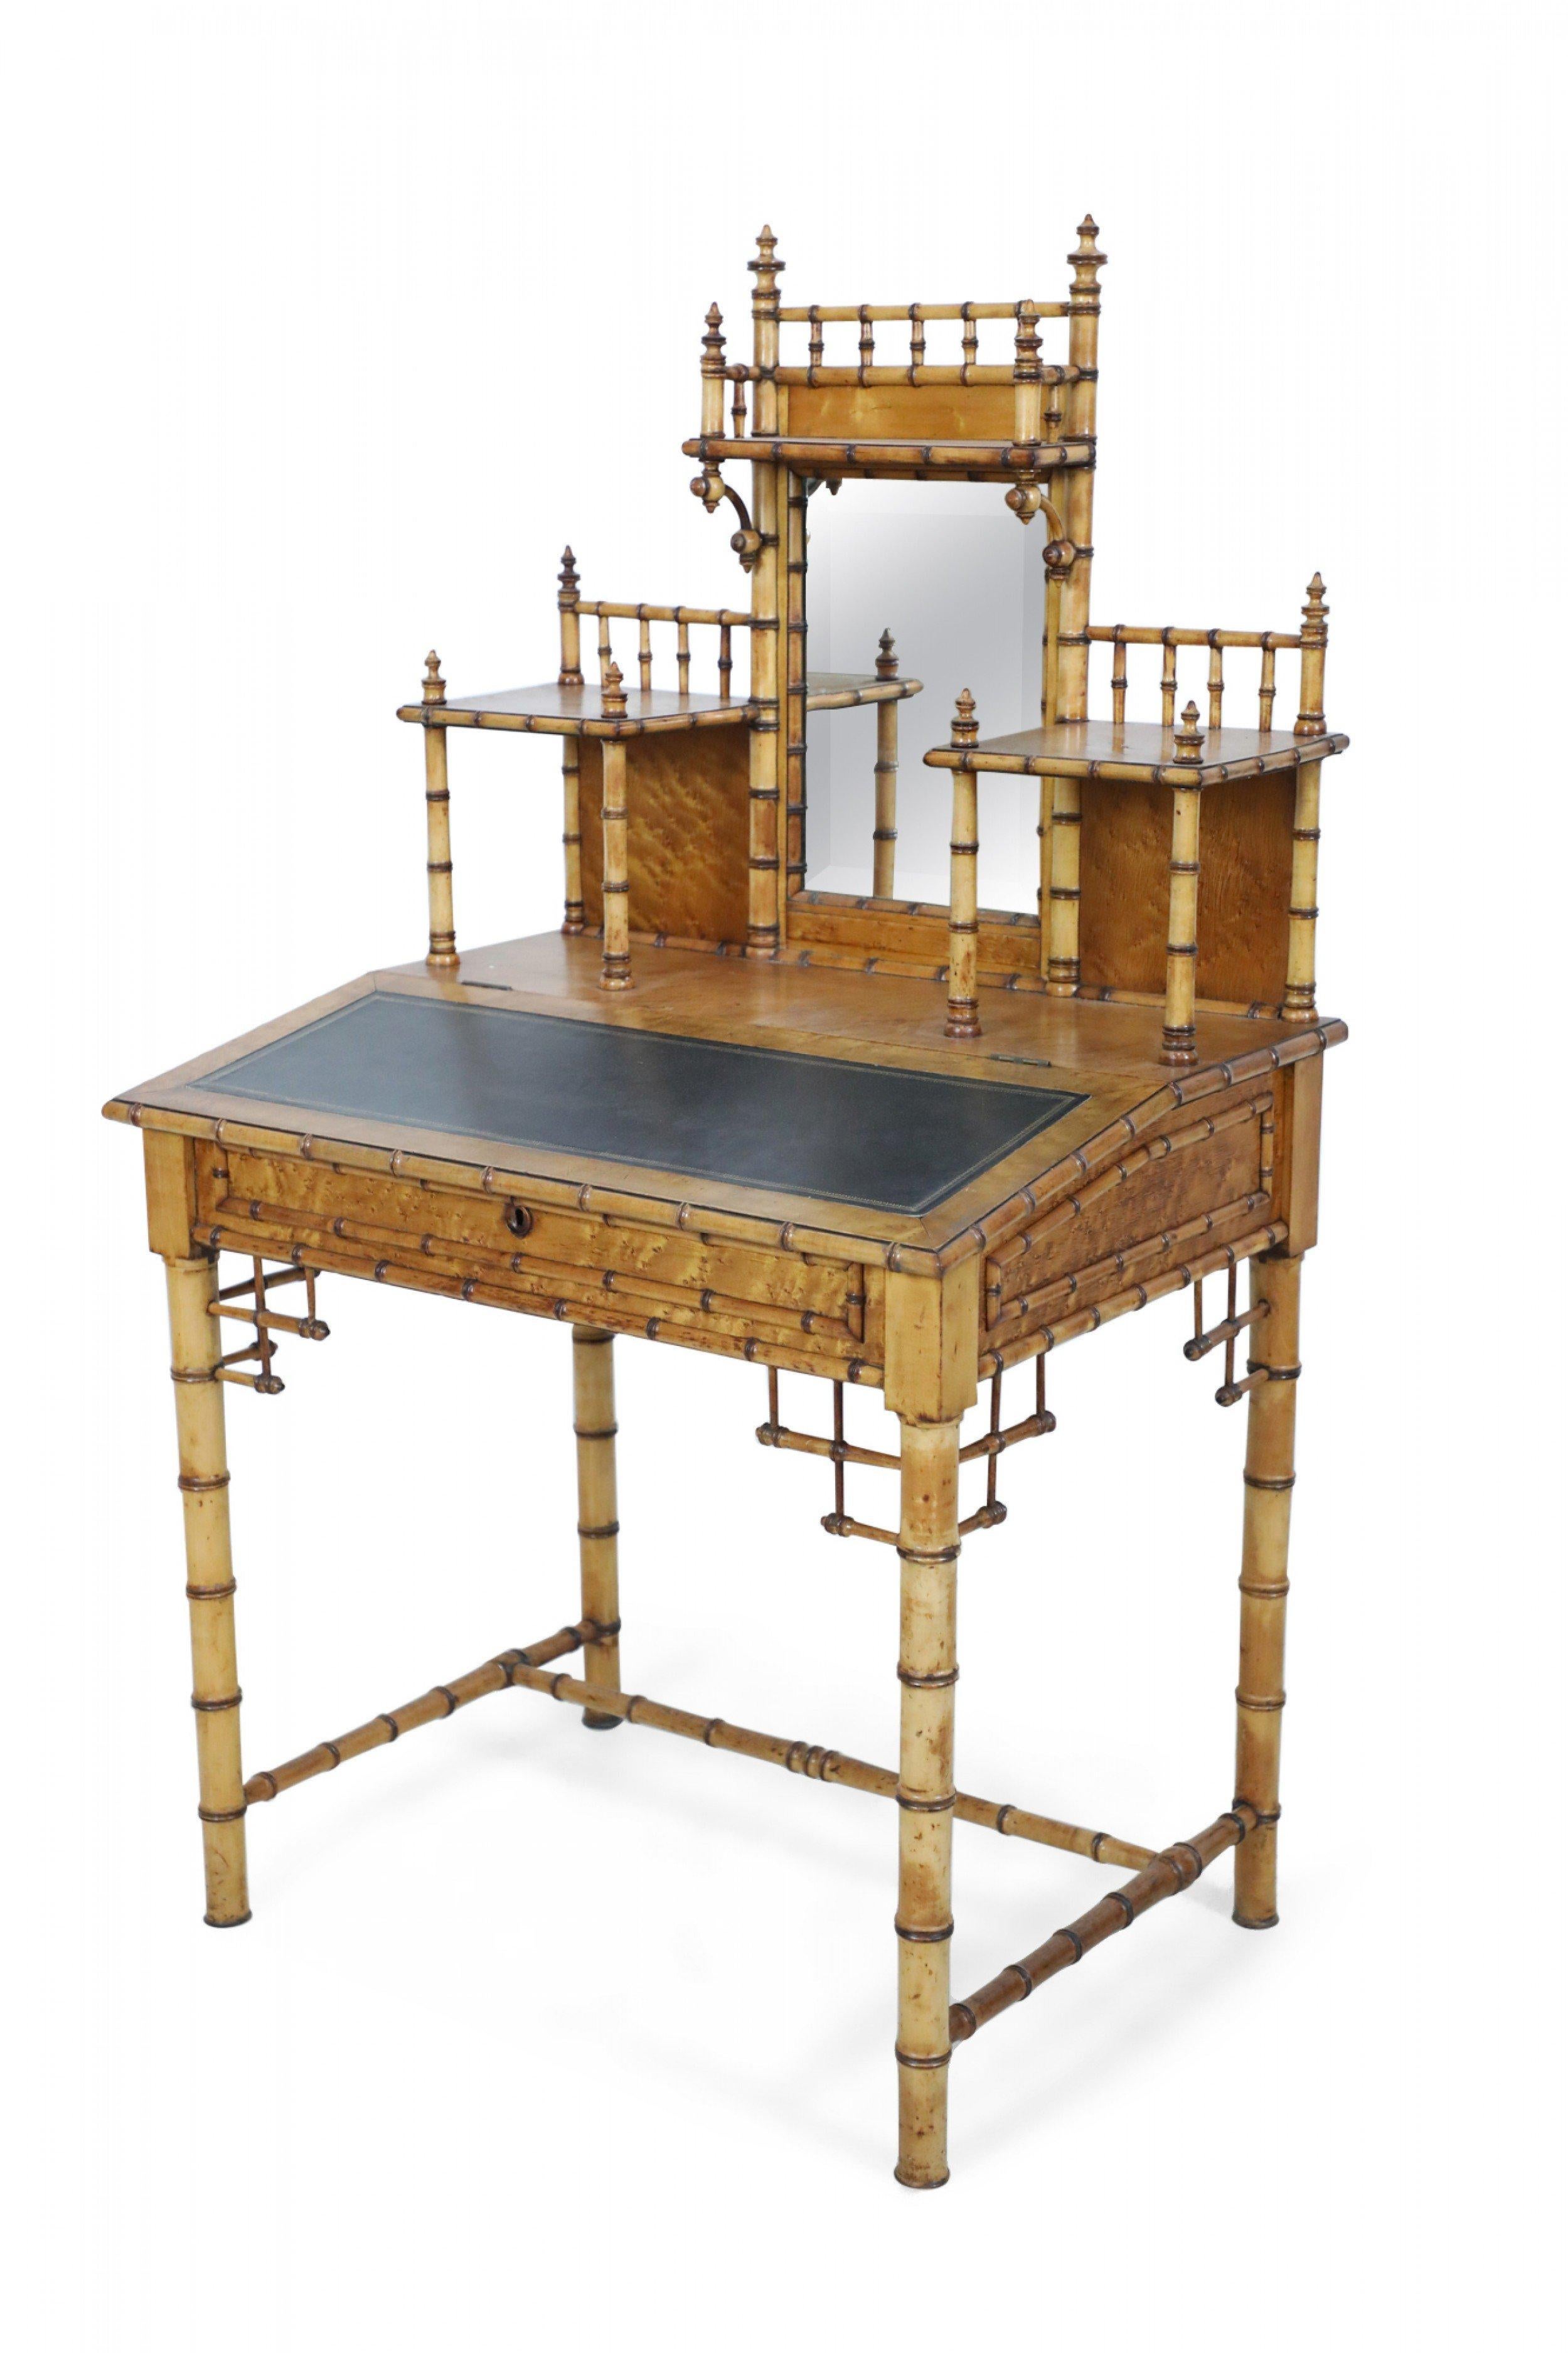 American Victorian Aesthetic Movement amber stained birdseye maple faux bamboo writing desk having an upper shelf with a central mirror and a tilted black leather writing surface which opens to reveal an interior compartment. (R.J. HORNER).
 